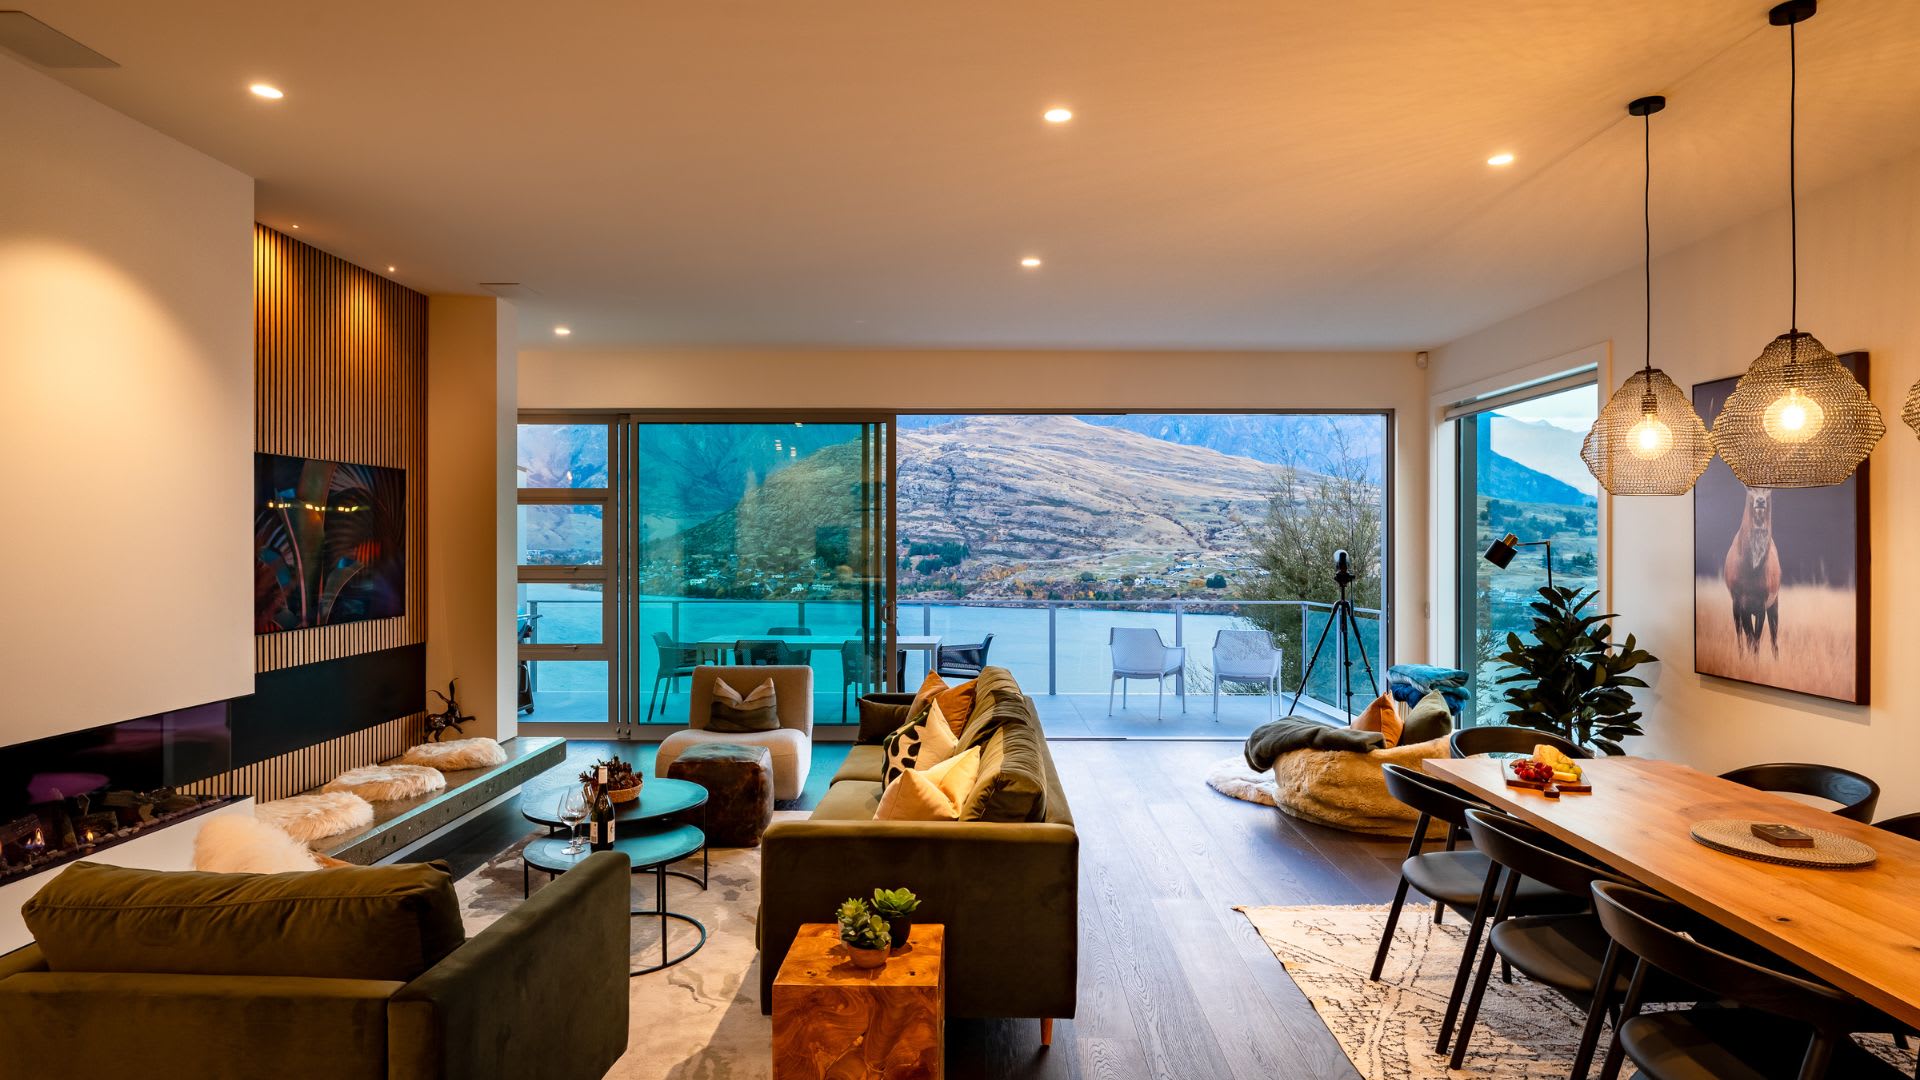 Atmospheric lighting sets the mood in this Queenstown five star accommodation